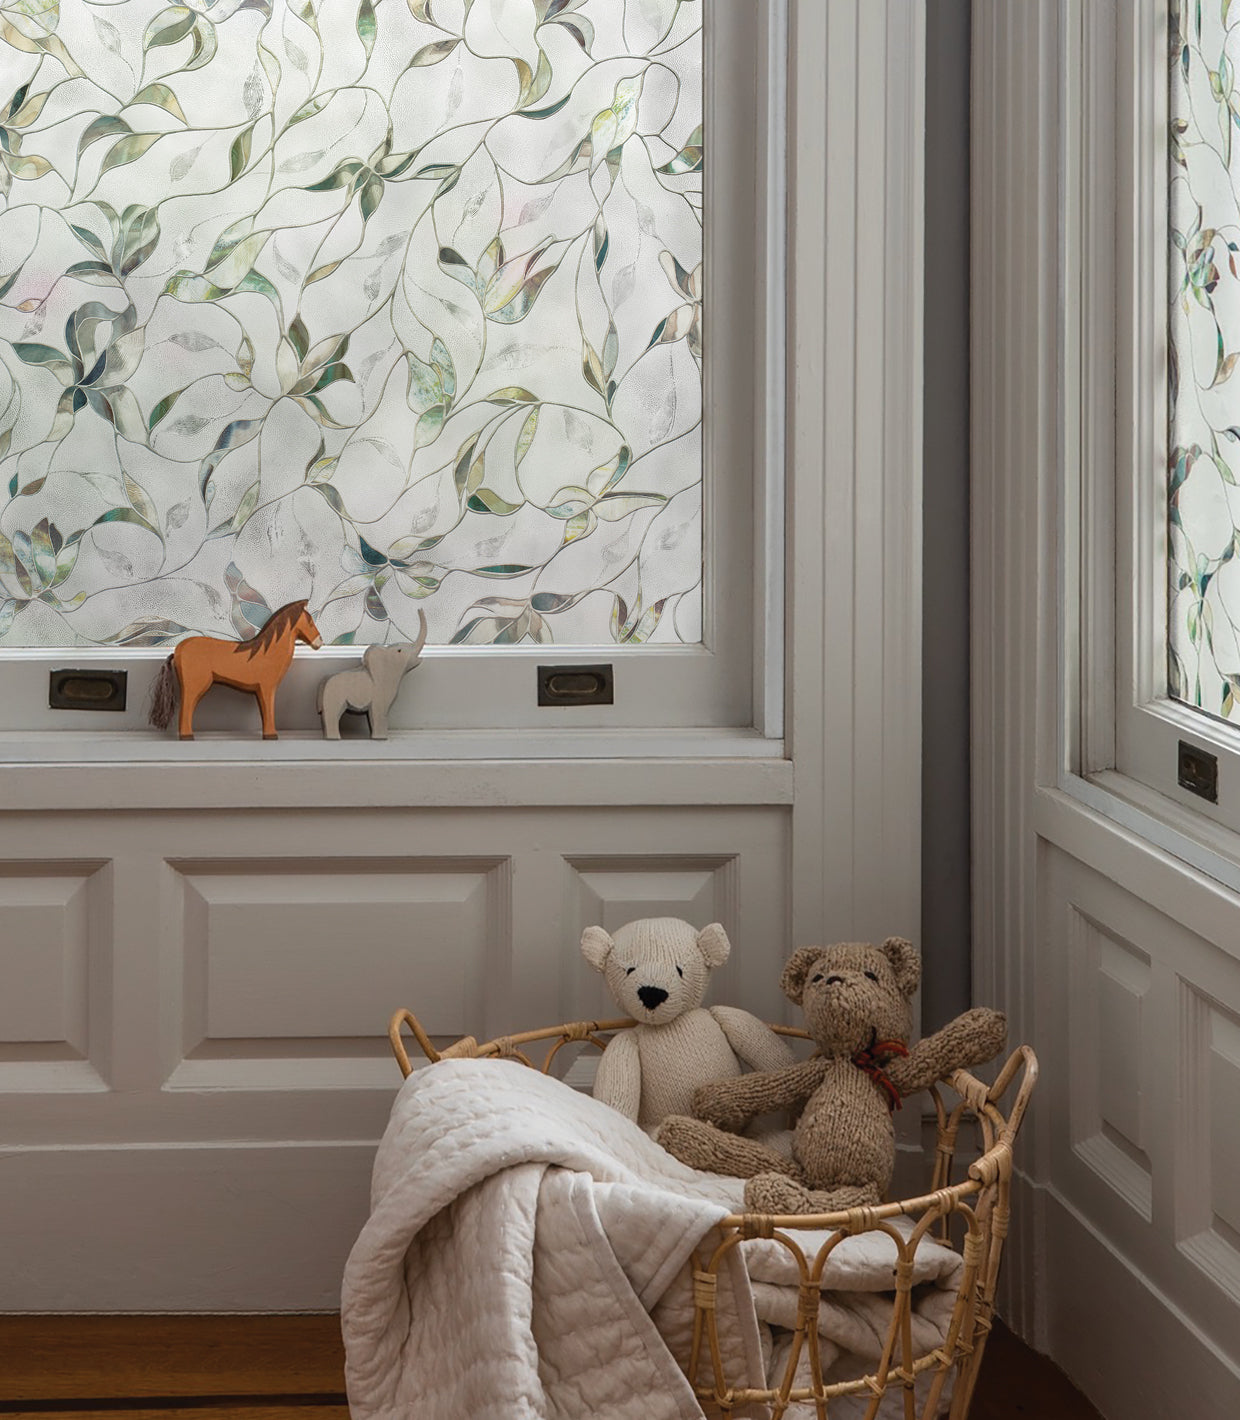 Child's room with light grey walls and a classic, upscale feel, featuring a wicker basket filled with stuffed animals and blankets, toy wooden horses on the sill, and both windows adorned with Artscape's Flight window film for a touch of elegance.